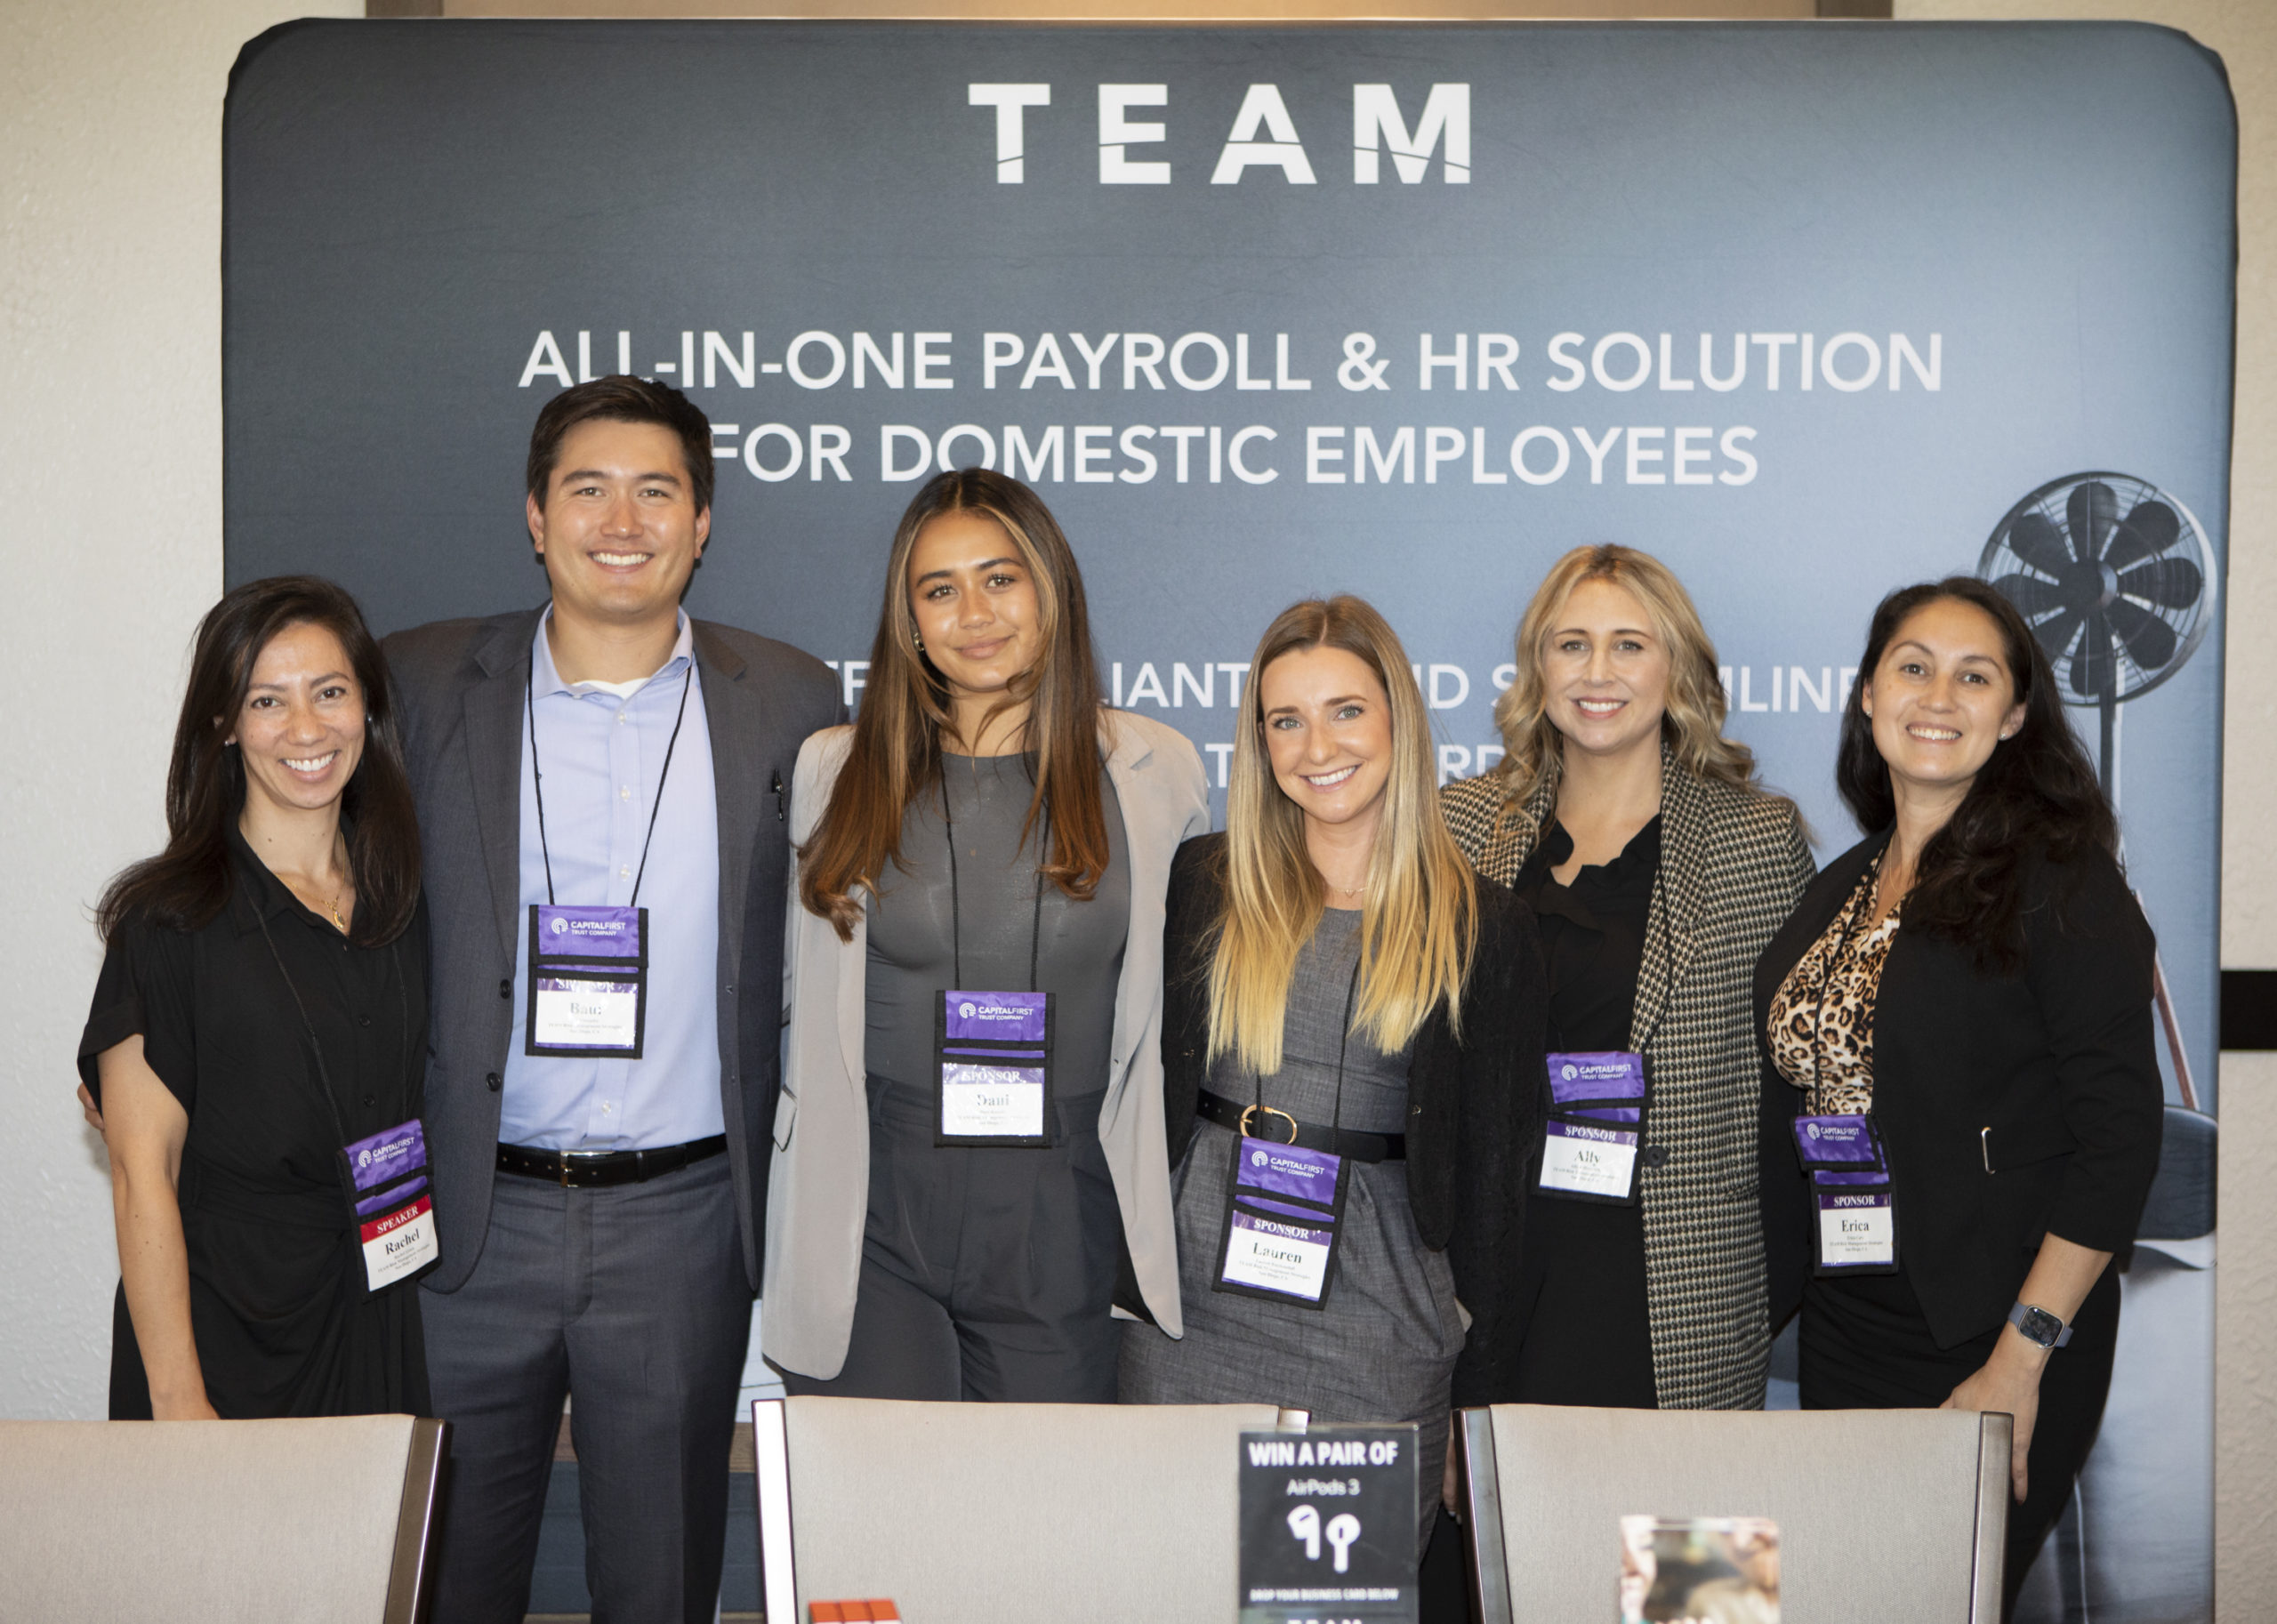 Six young professionals pose for a photo in front of a banner that reads "T E A M - All-in-one payroll & HR solutions for domestic employees."